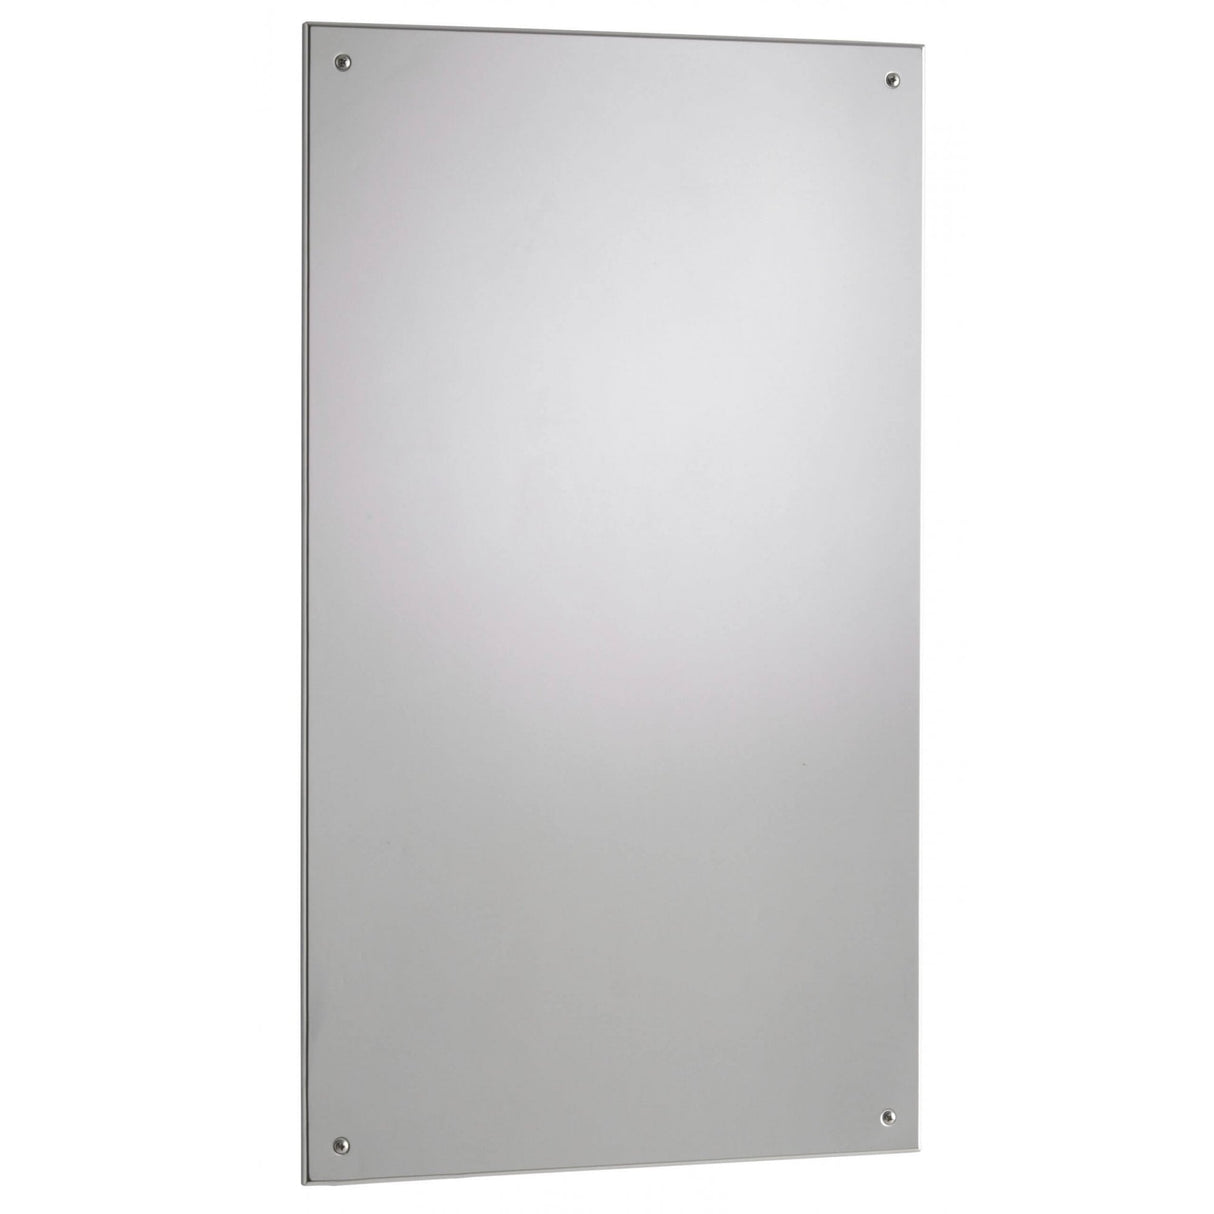 Unbreakable Frameless High Polished Stainless Steel Mirror B-1556_1824 (445x597x6)